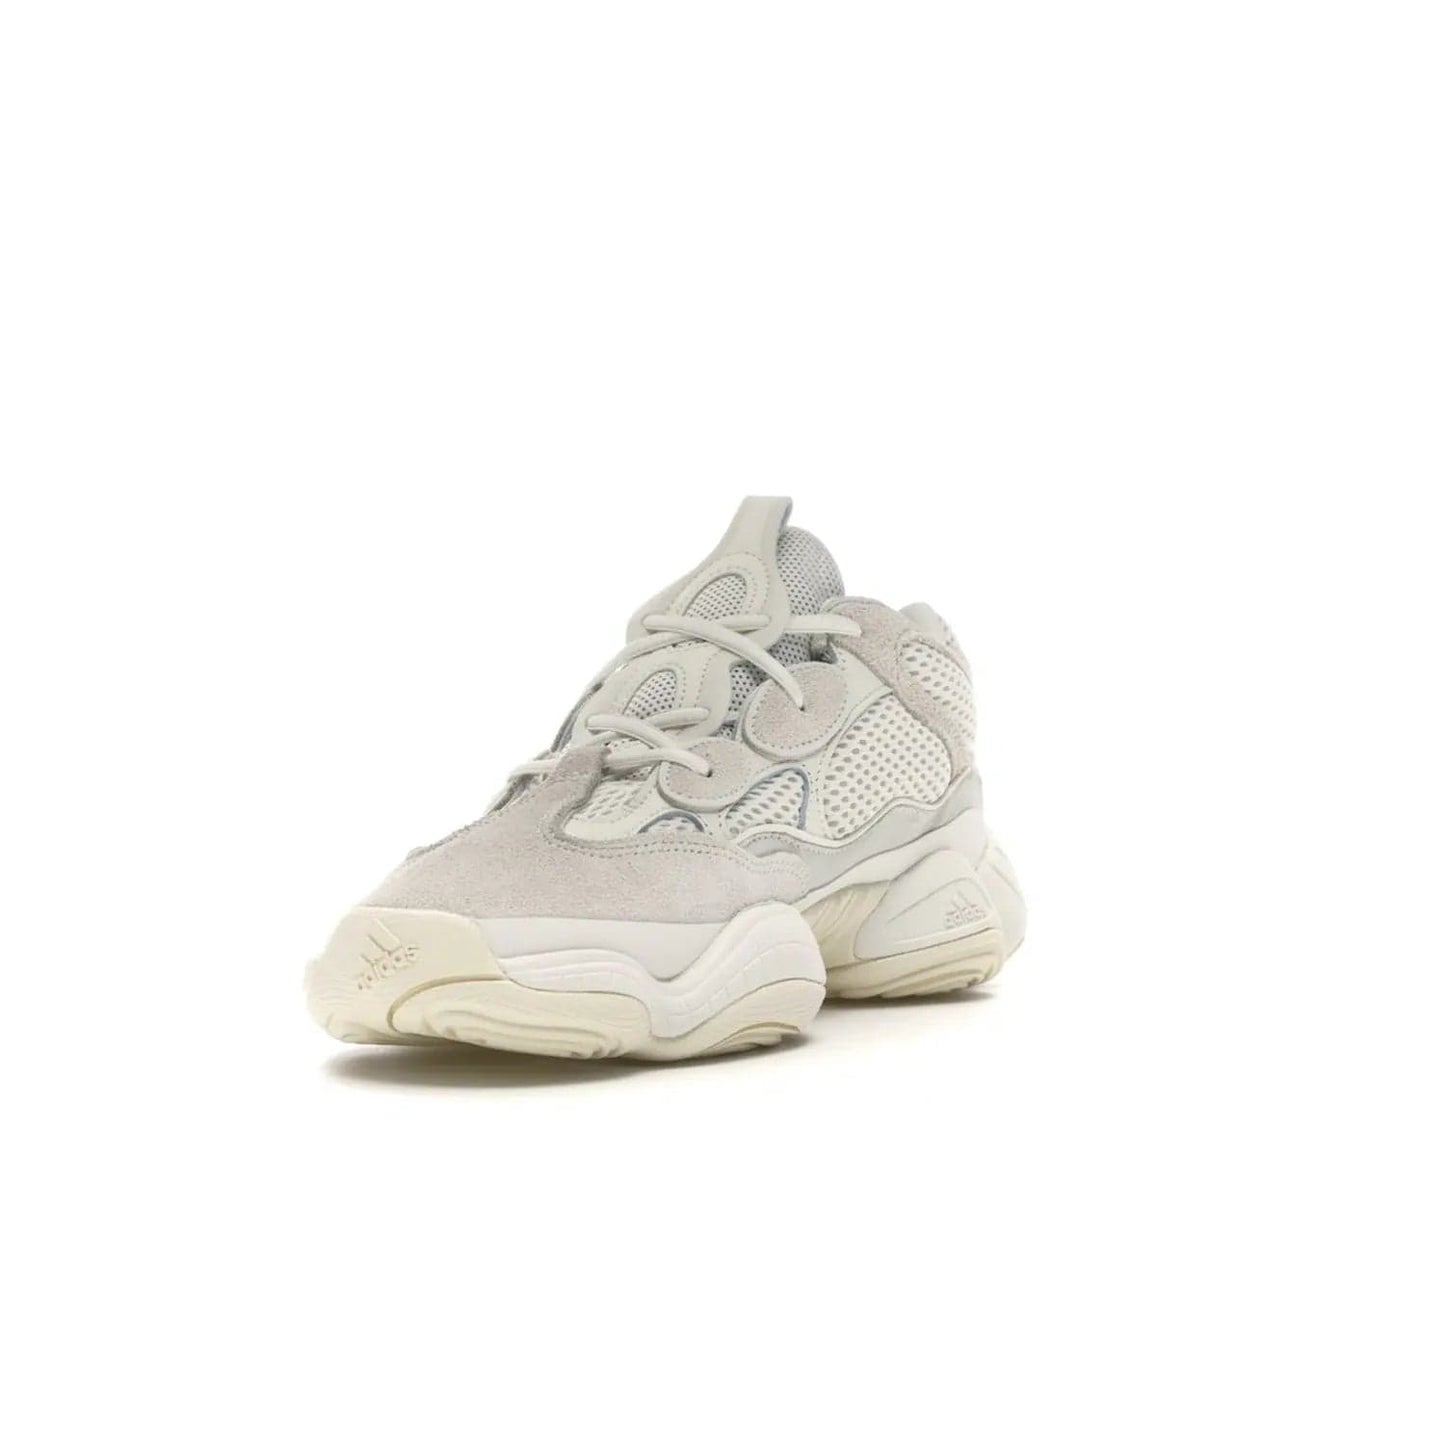 adidas Yeezy 500 Bone White - Image 13 - Only at www.BallersClubKickz.com - Classic look perfect for any sneaker collection. The adidas Yeezy 500 "Bone White" blends a white mesh upper with suede overlays & a chunky midsole inspired by the Adidas KB3. Complimented by a tonal-cream outsole, this timeless style is a must-have.